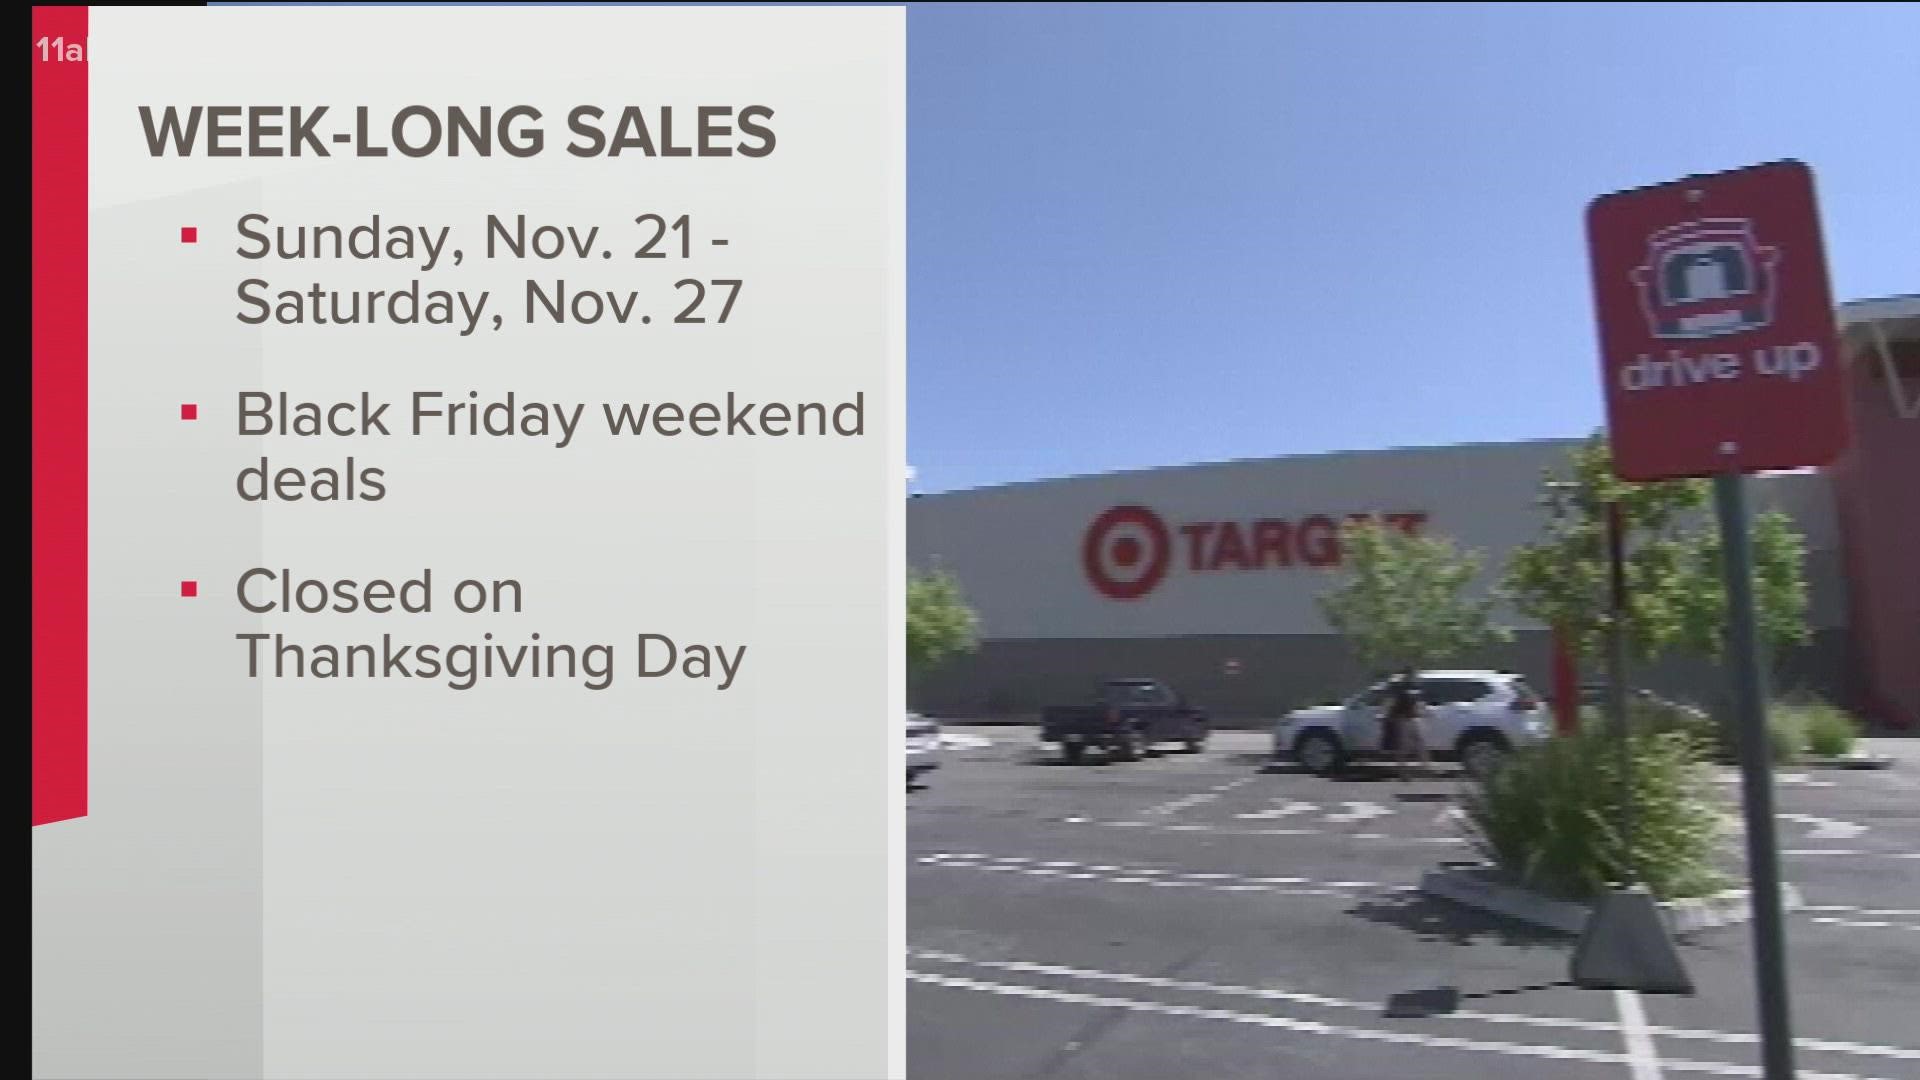 While Target locations will be closed on Thanksgiving, the company said most of its stores will reopen at 7 a.m. local time on Black Friday, Nov. 26.